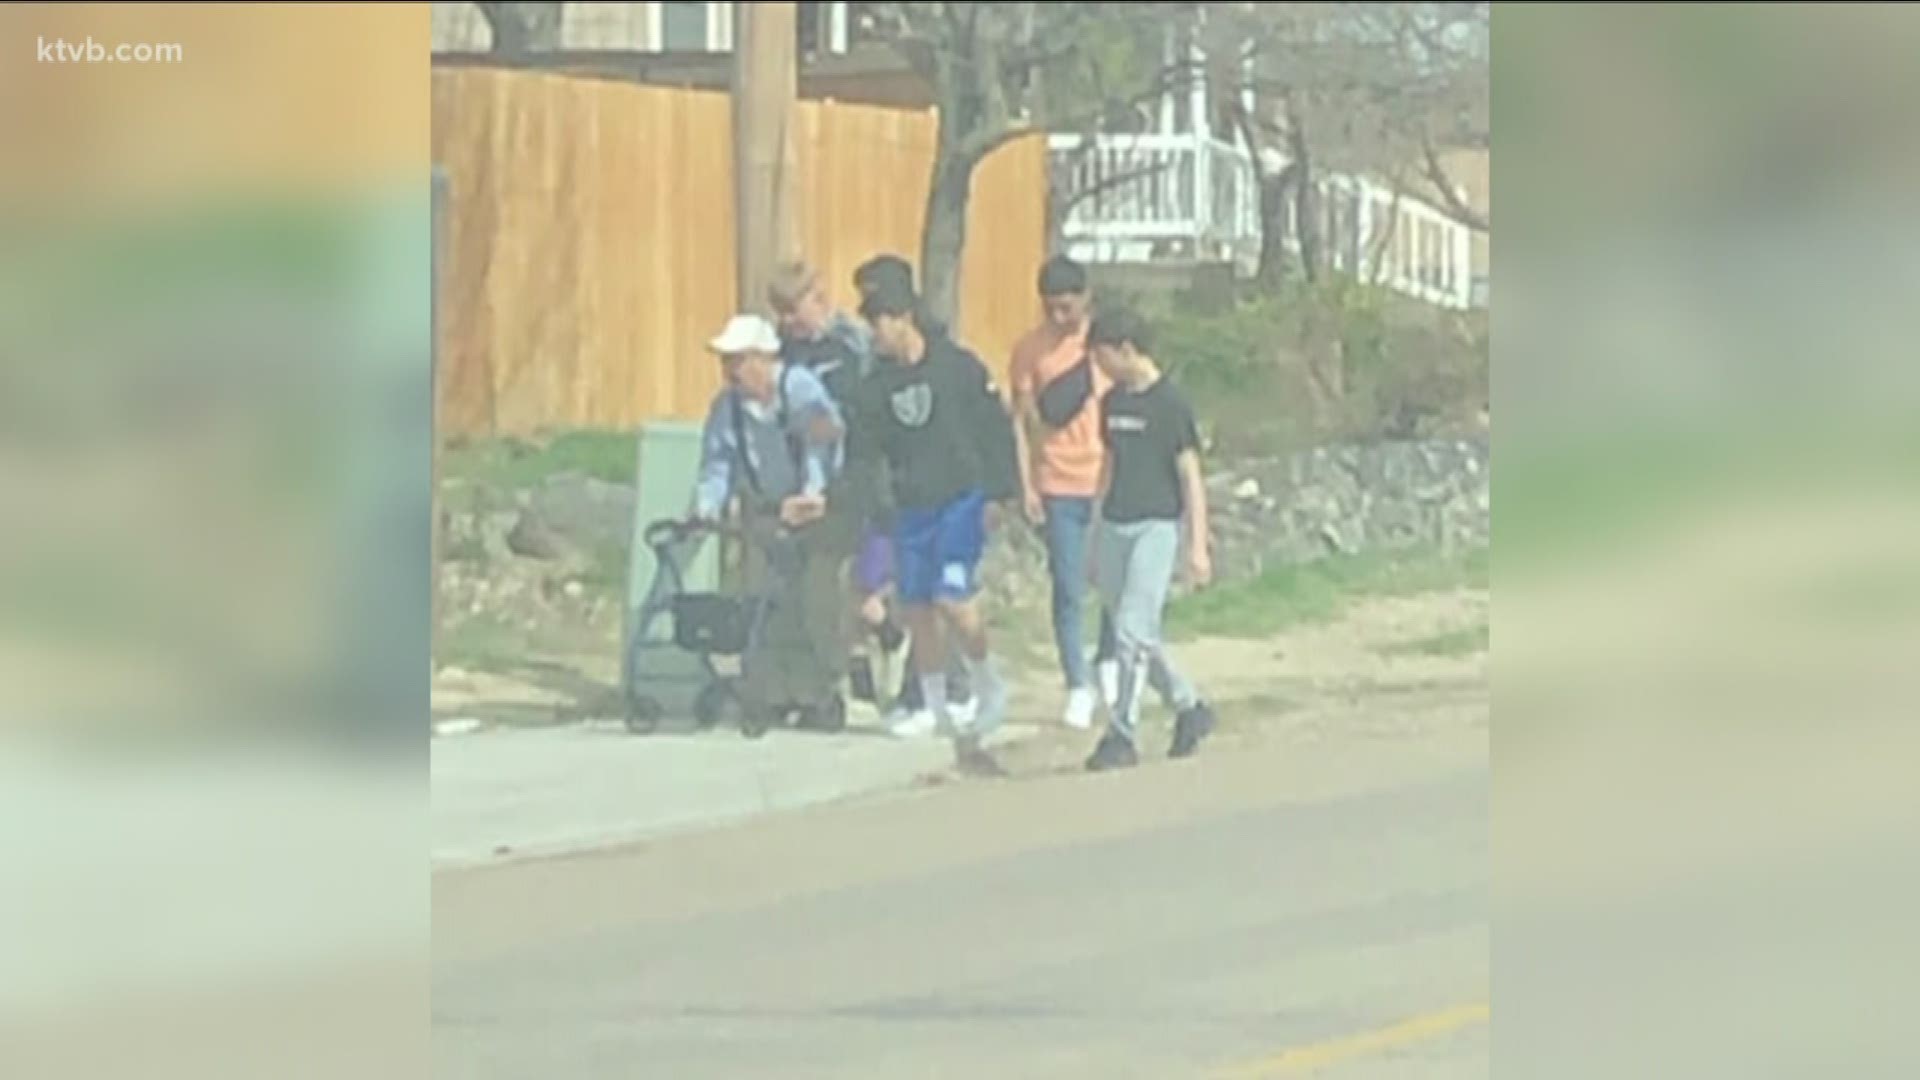 Teenagers in Caldwell saw an elderly man fall down on the sidewalk and they immediately went to help him, and photos of them walking him back to his house quickly went viral on Facebook.